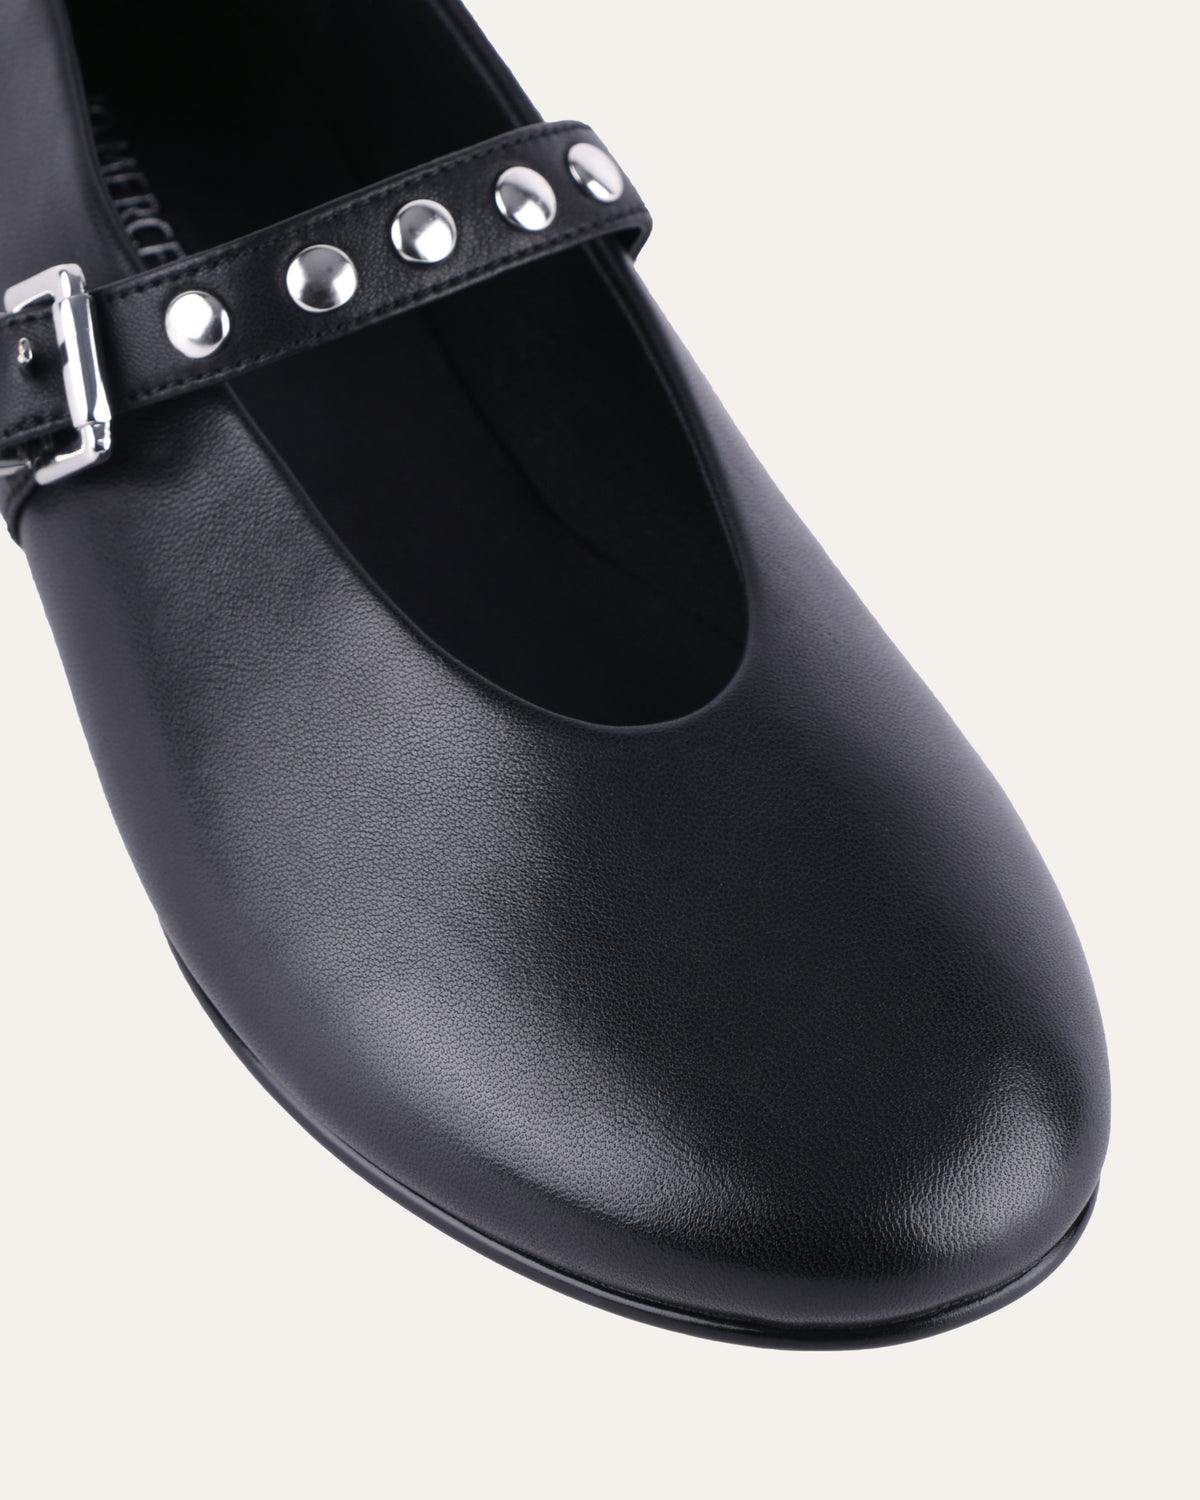 GISELLE CASUAL FLATS BLACK LEATHER